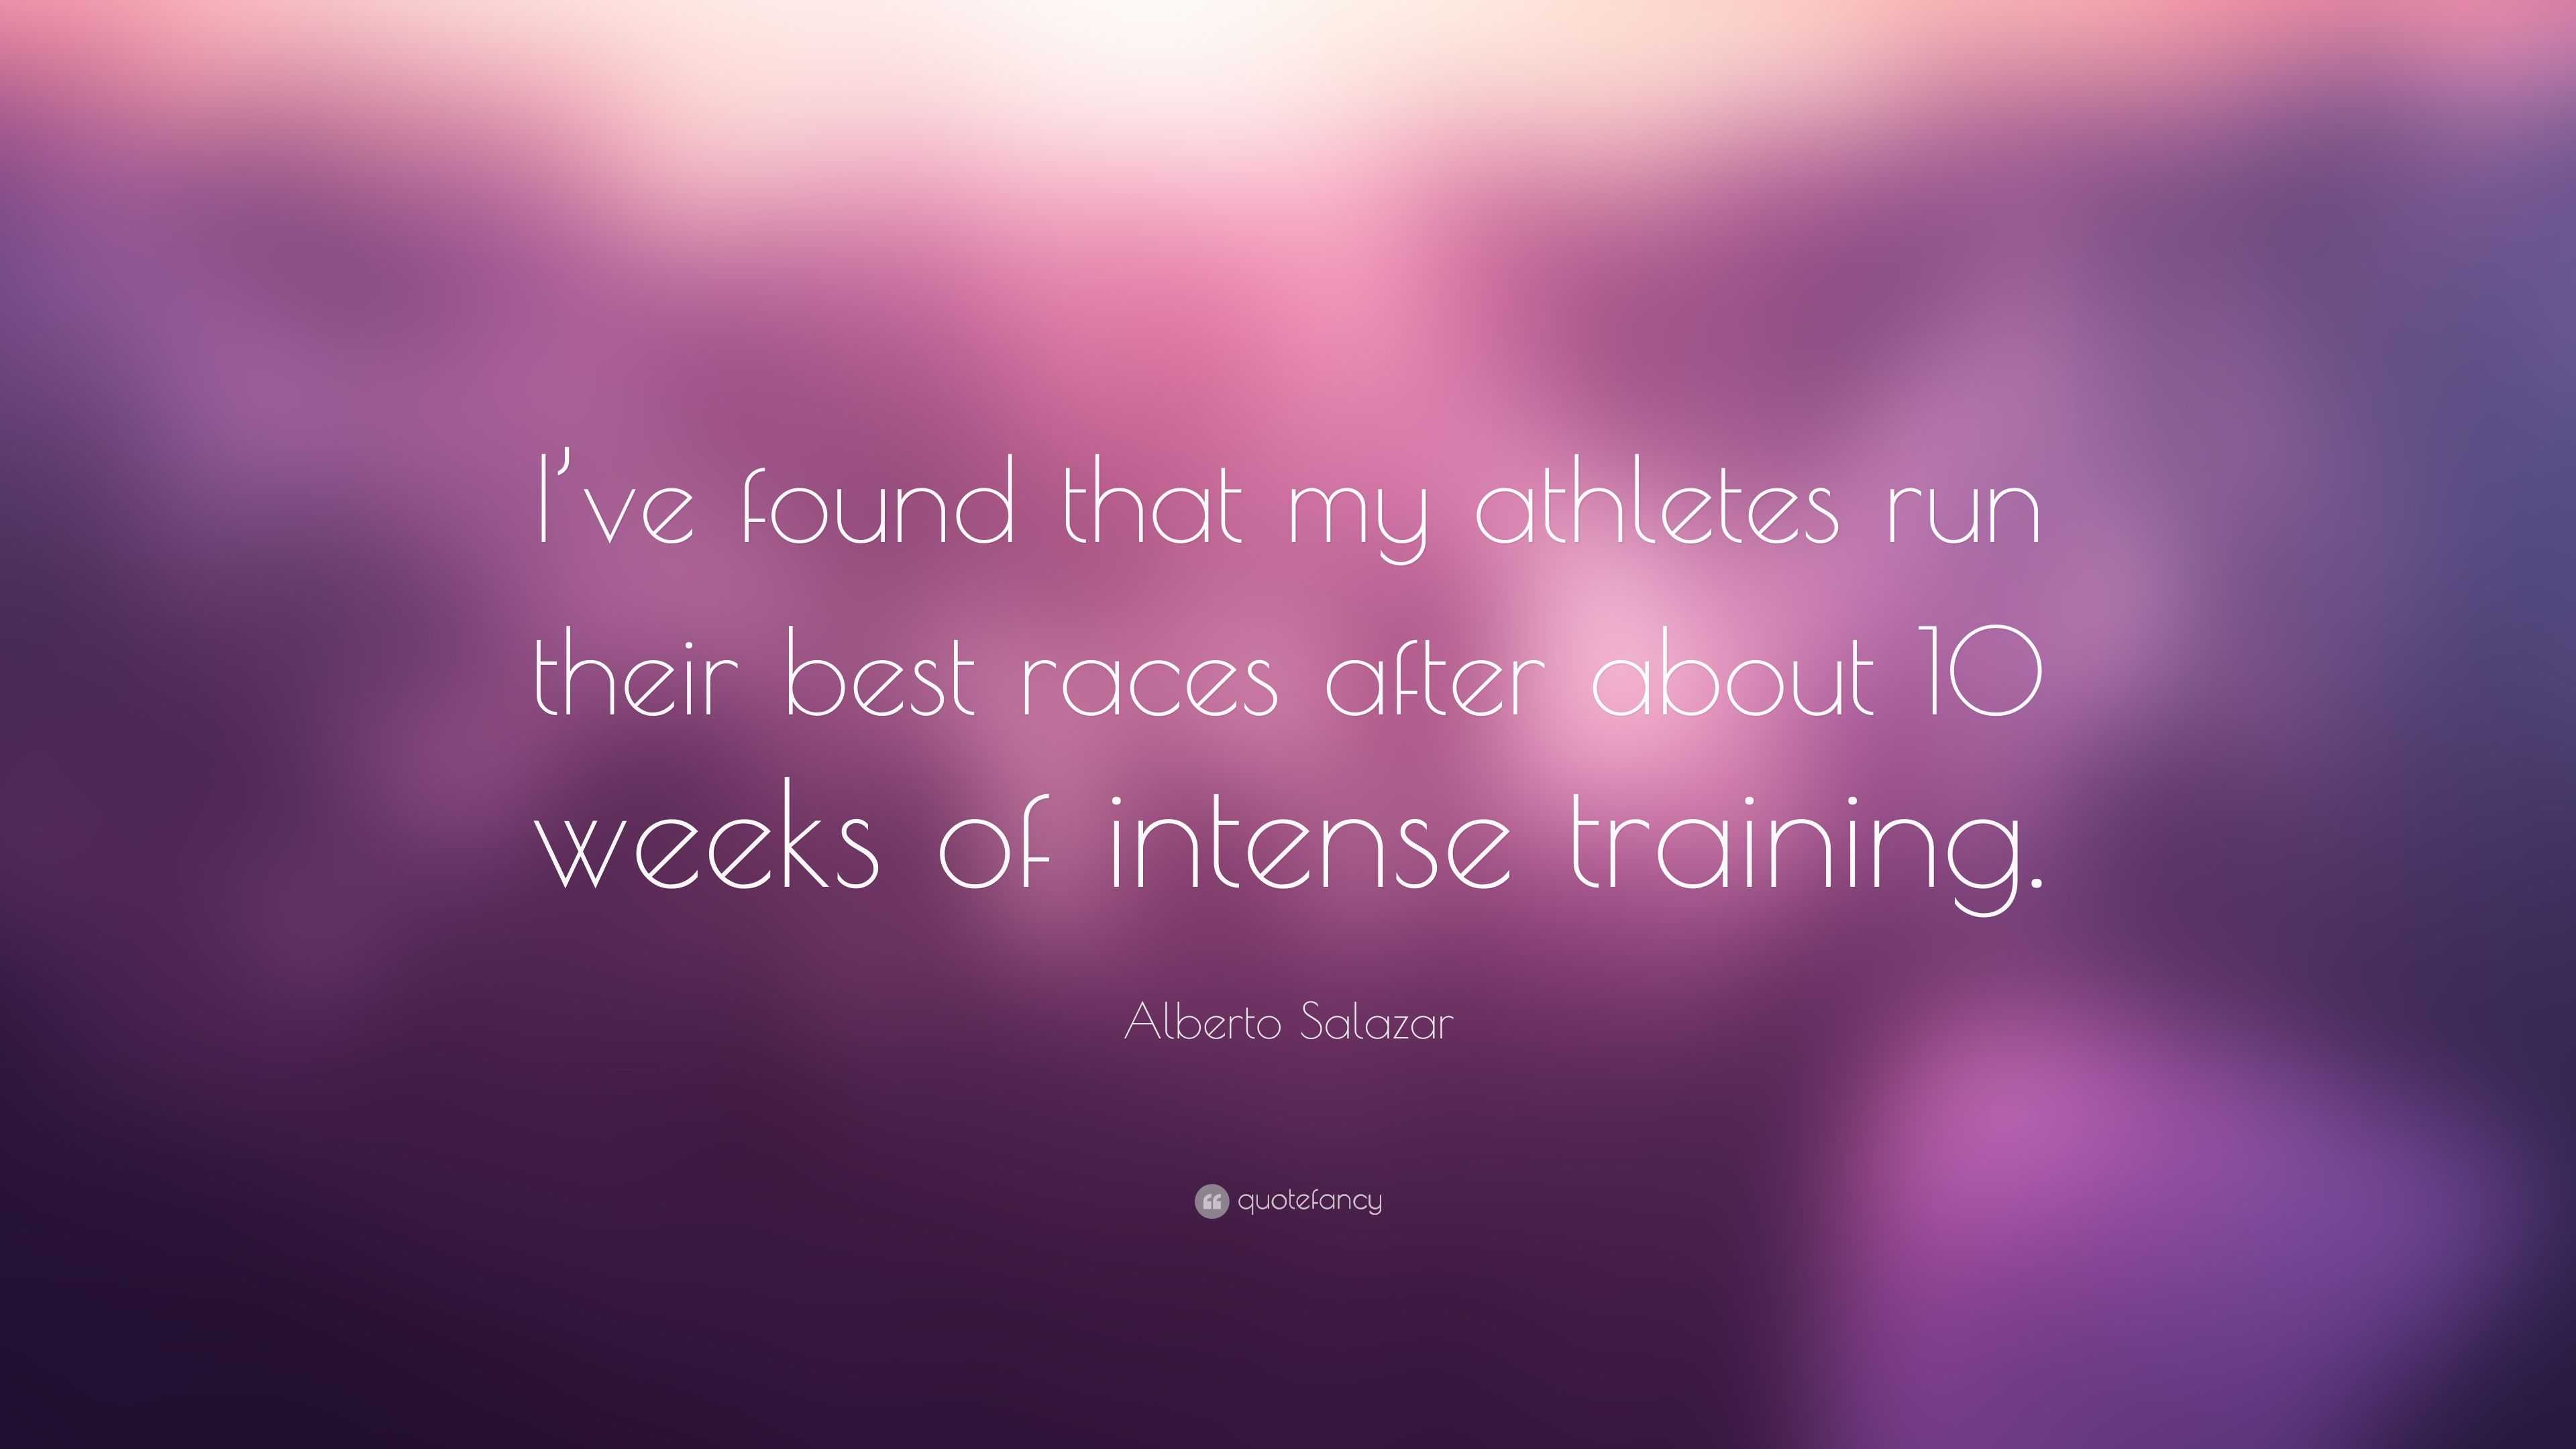 10 Famous Runners and Their Inspirational Quotes